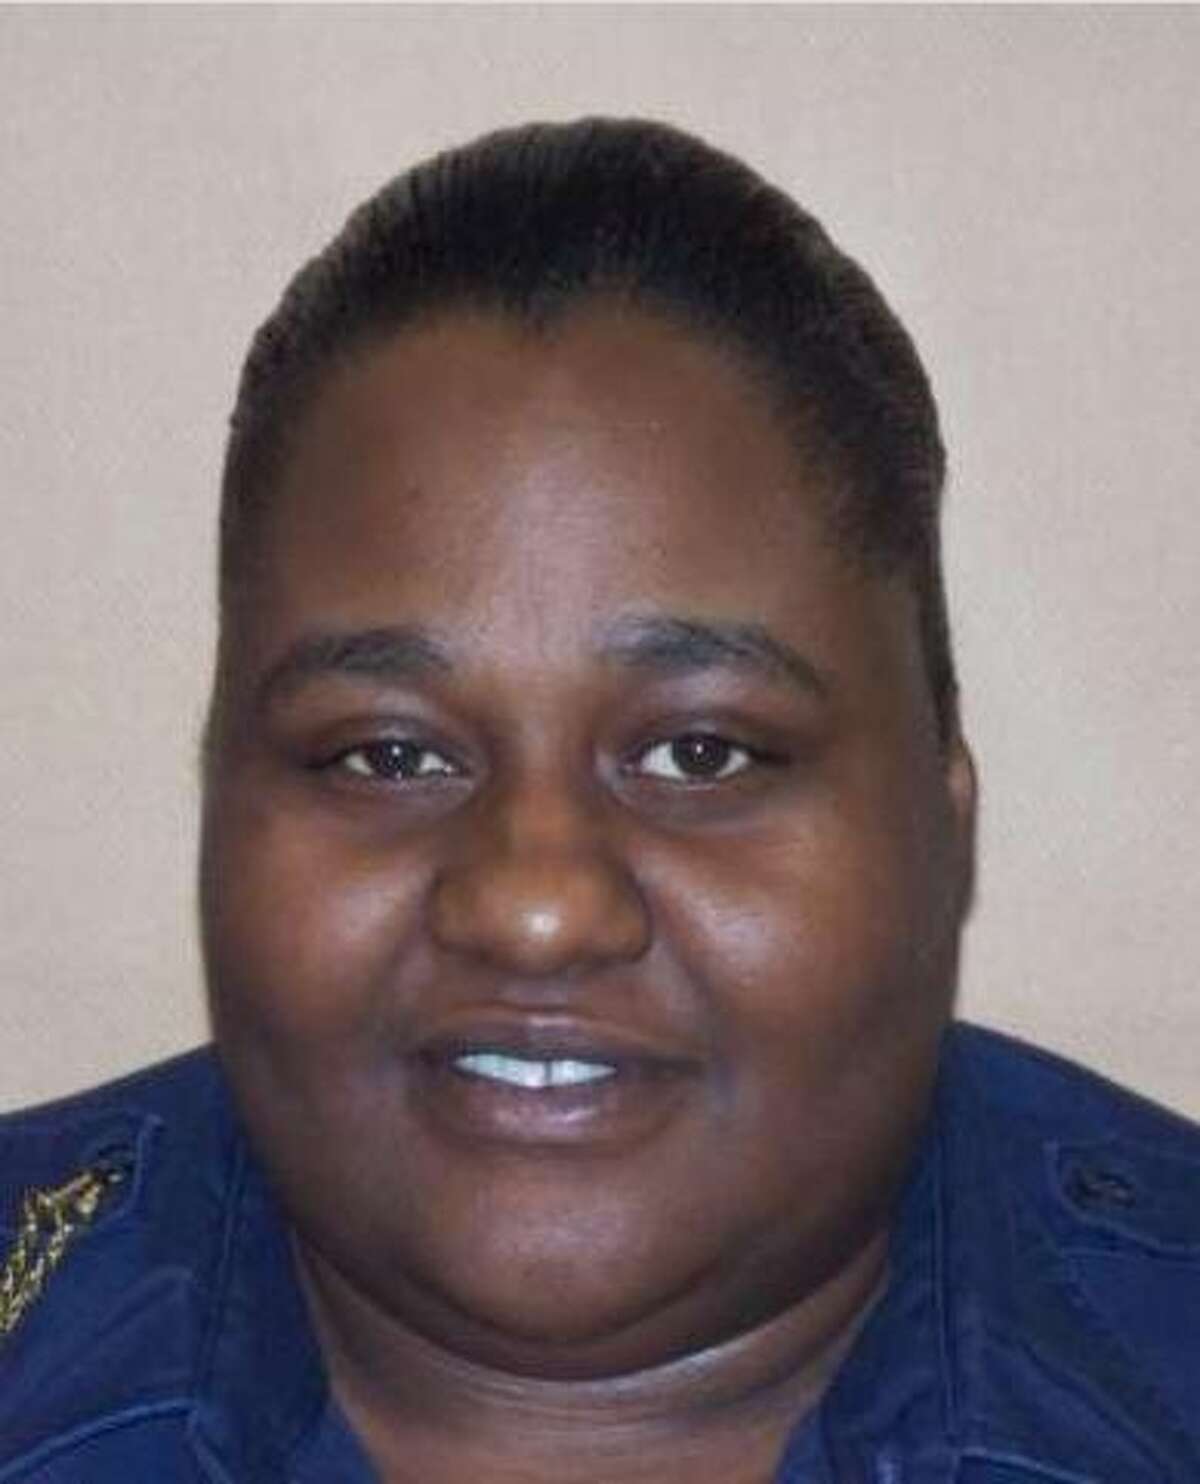 Adrienne Moody, a former North Carolina Department of Public Safety correctional officer, has pleaded guilty to a drug conspiracy charge.